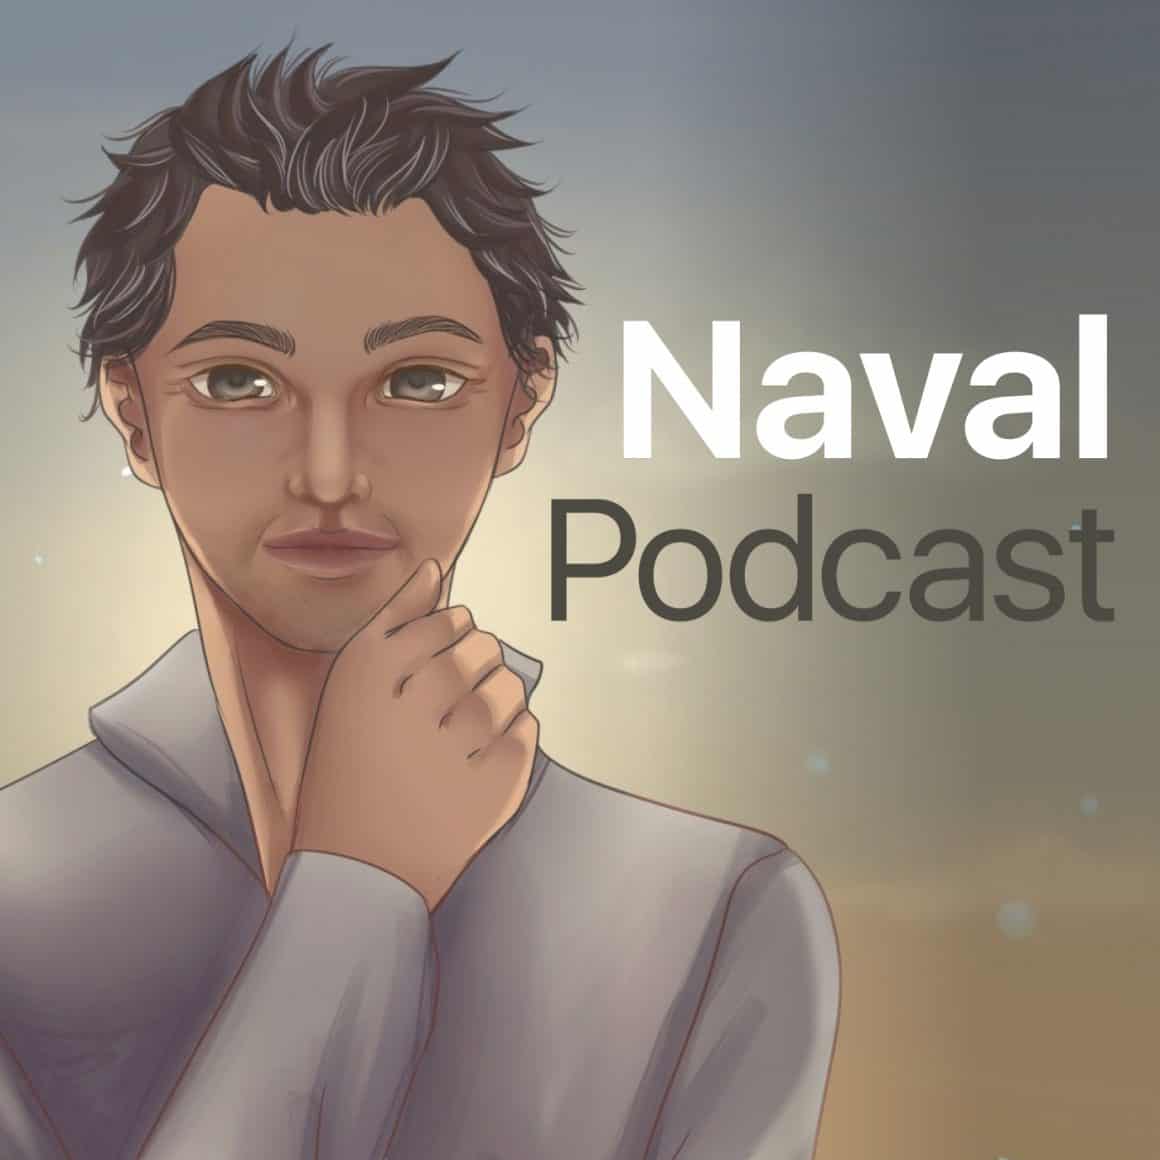 Naval Podcast - podcasts for startups and growth